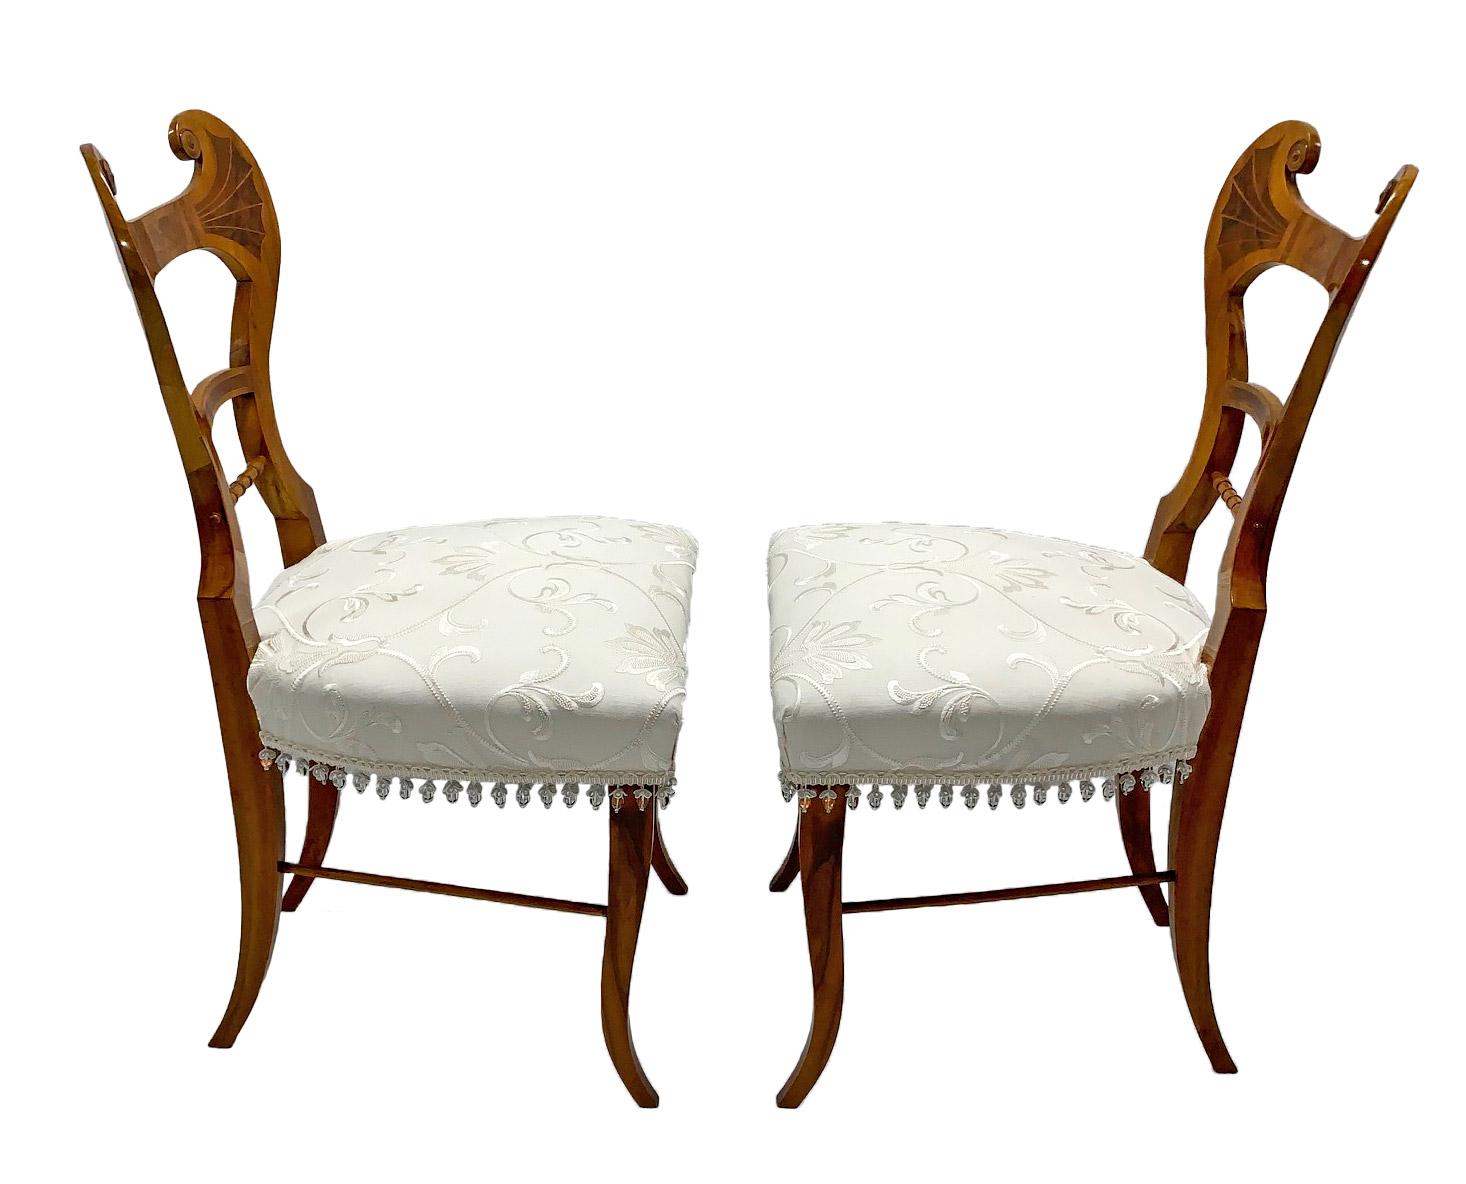 Pair of early 19th century neoclassical Biedermeier side chairs with walnut inlays, circa 1825 from Austria. These stunning chairs have been recently reupholstered with Colefax and Fowler’s ivory embroidered fabric.  The glass bead trim is from